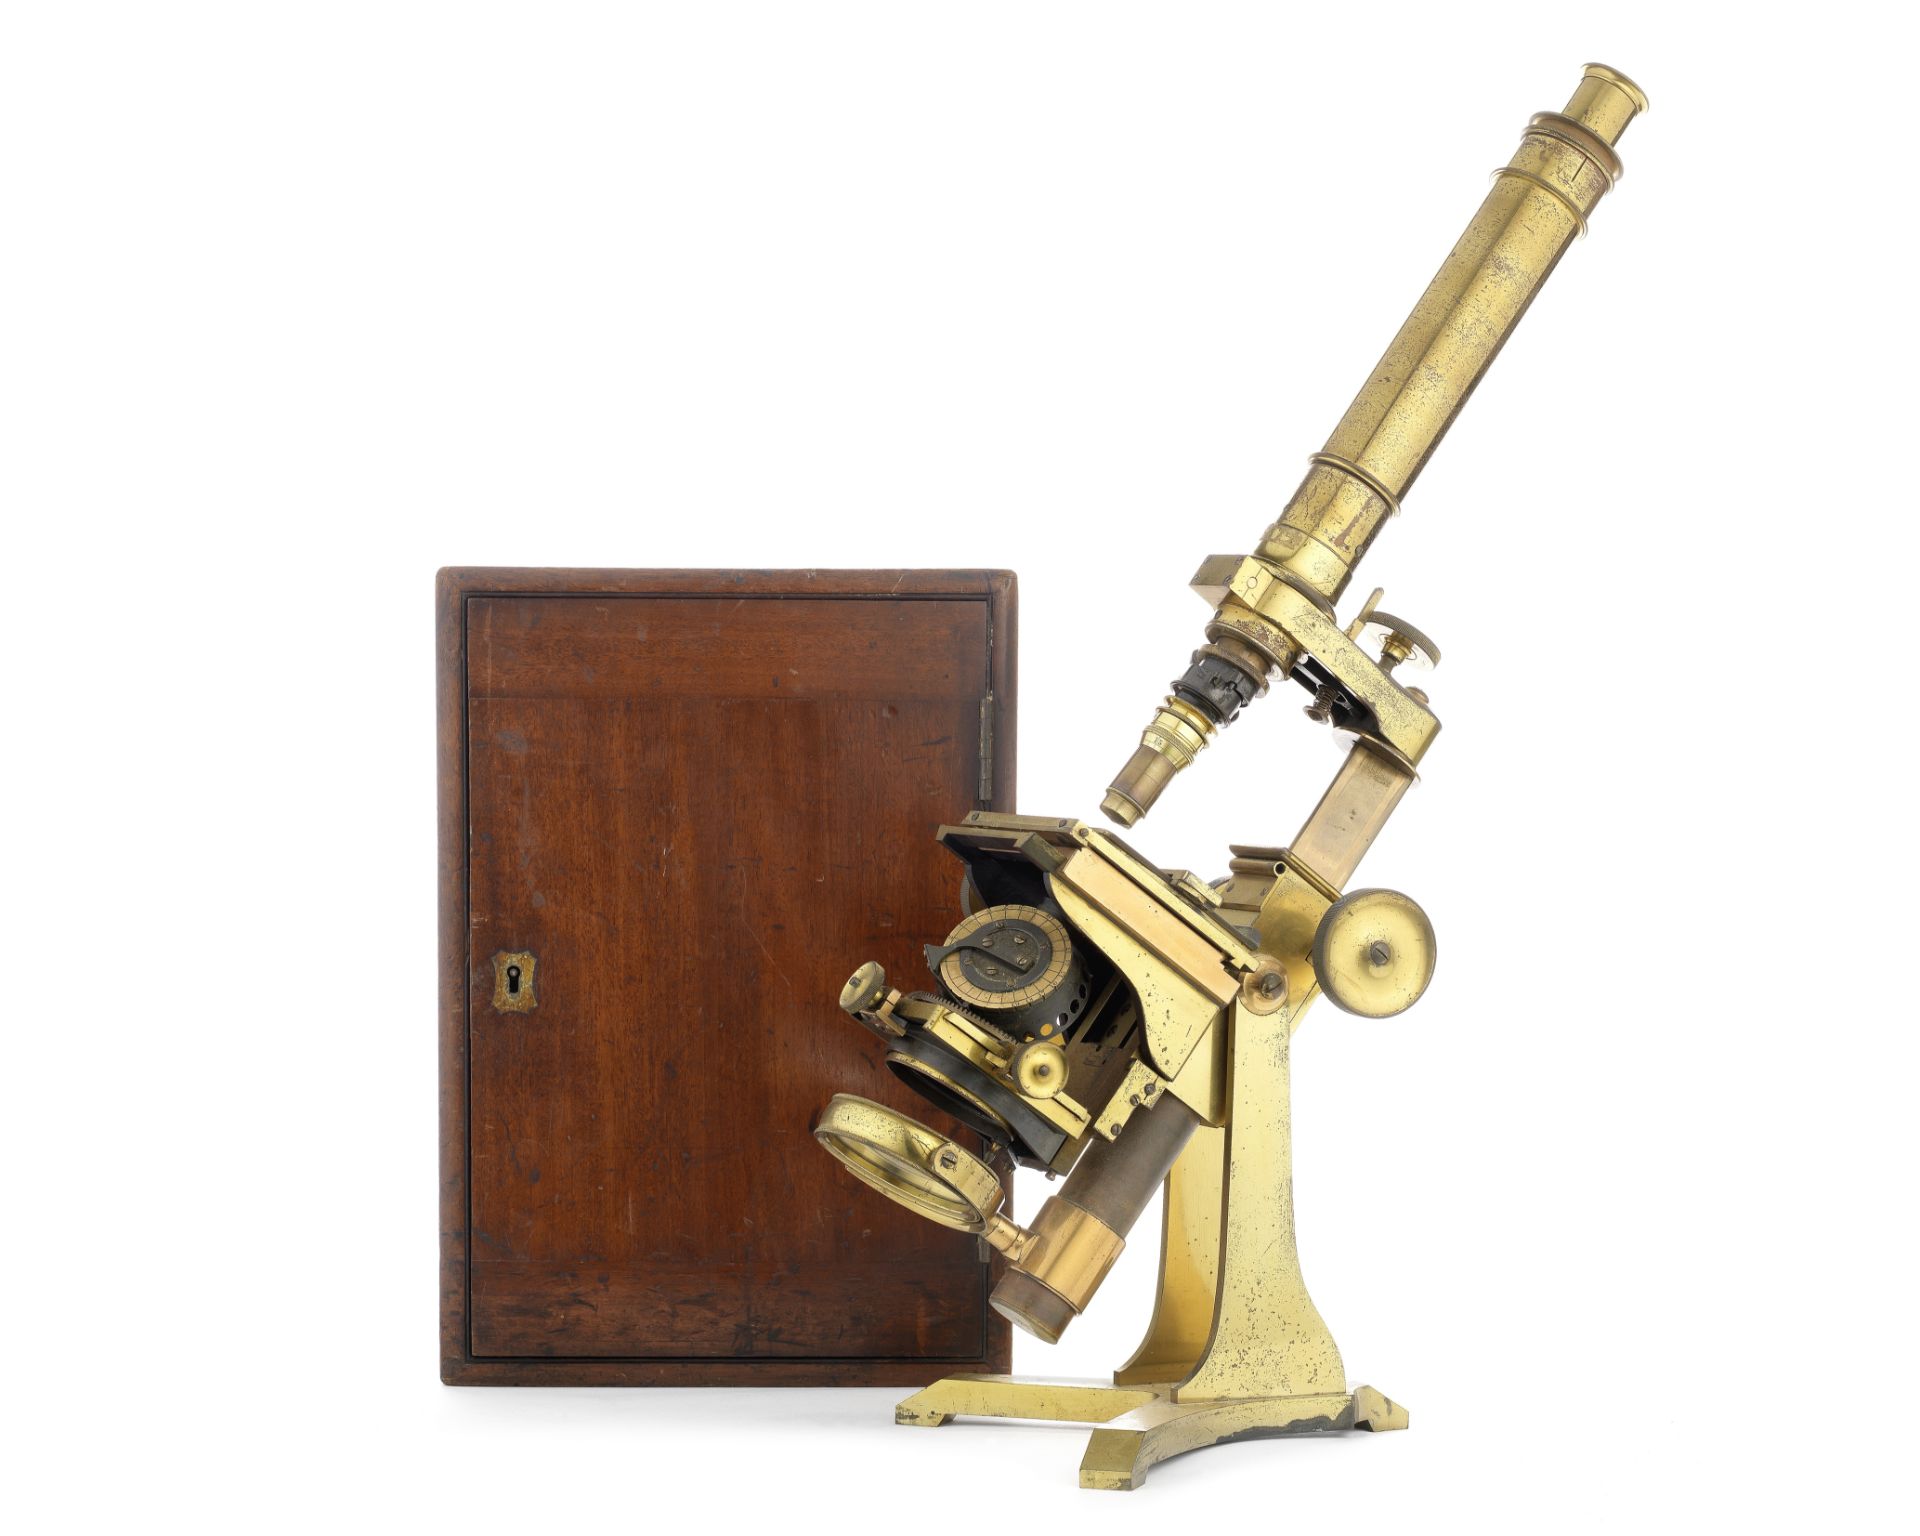 An Andrew Rosss brass compound monocular microscope, English, mid 19th century,